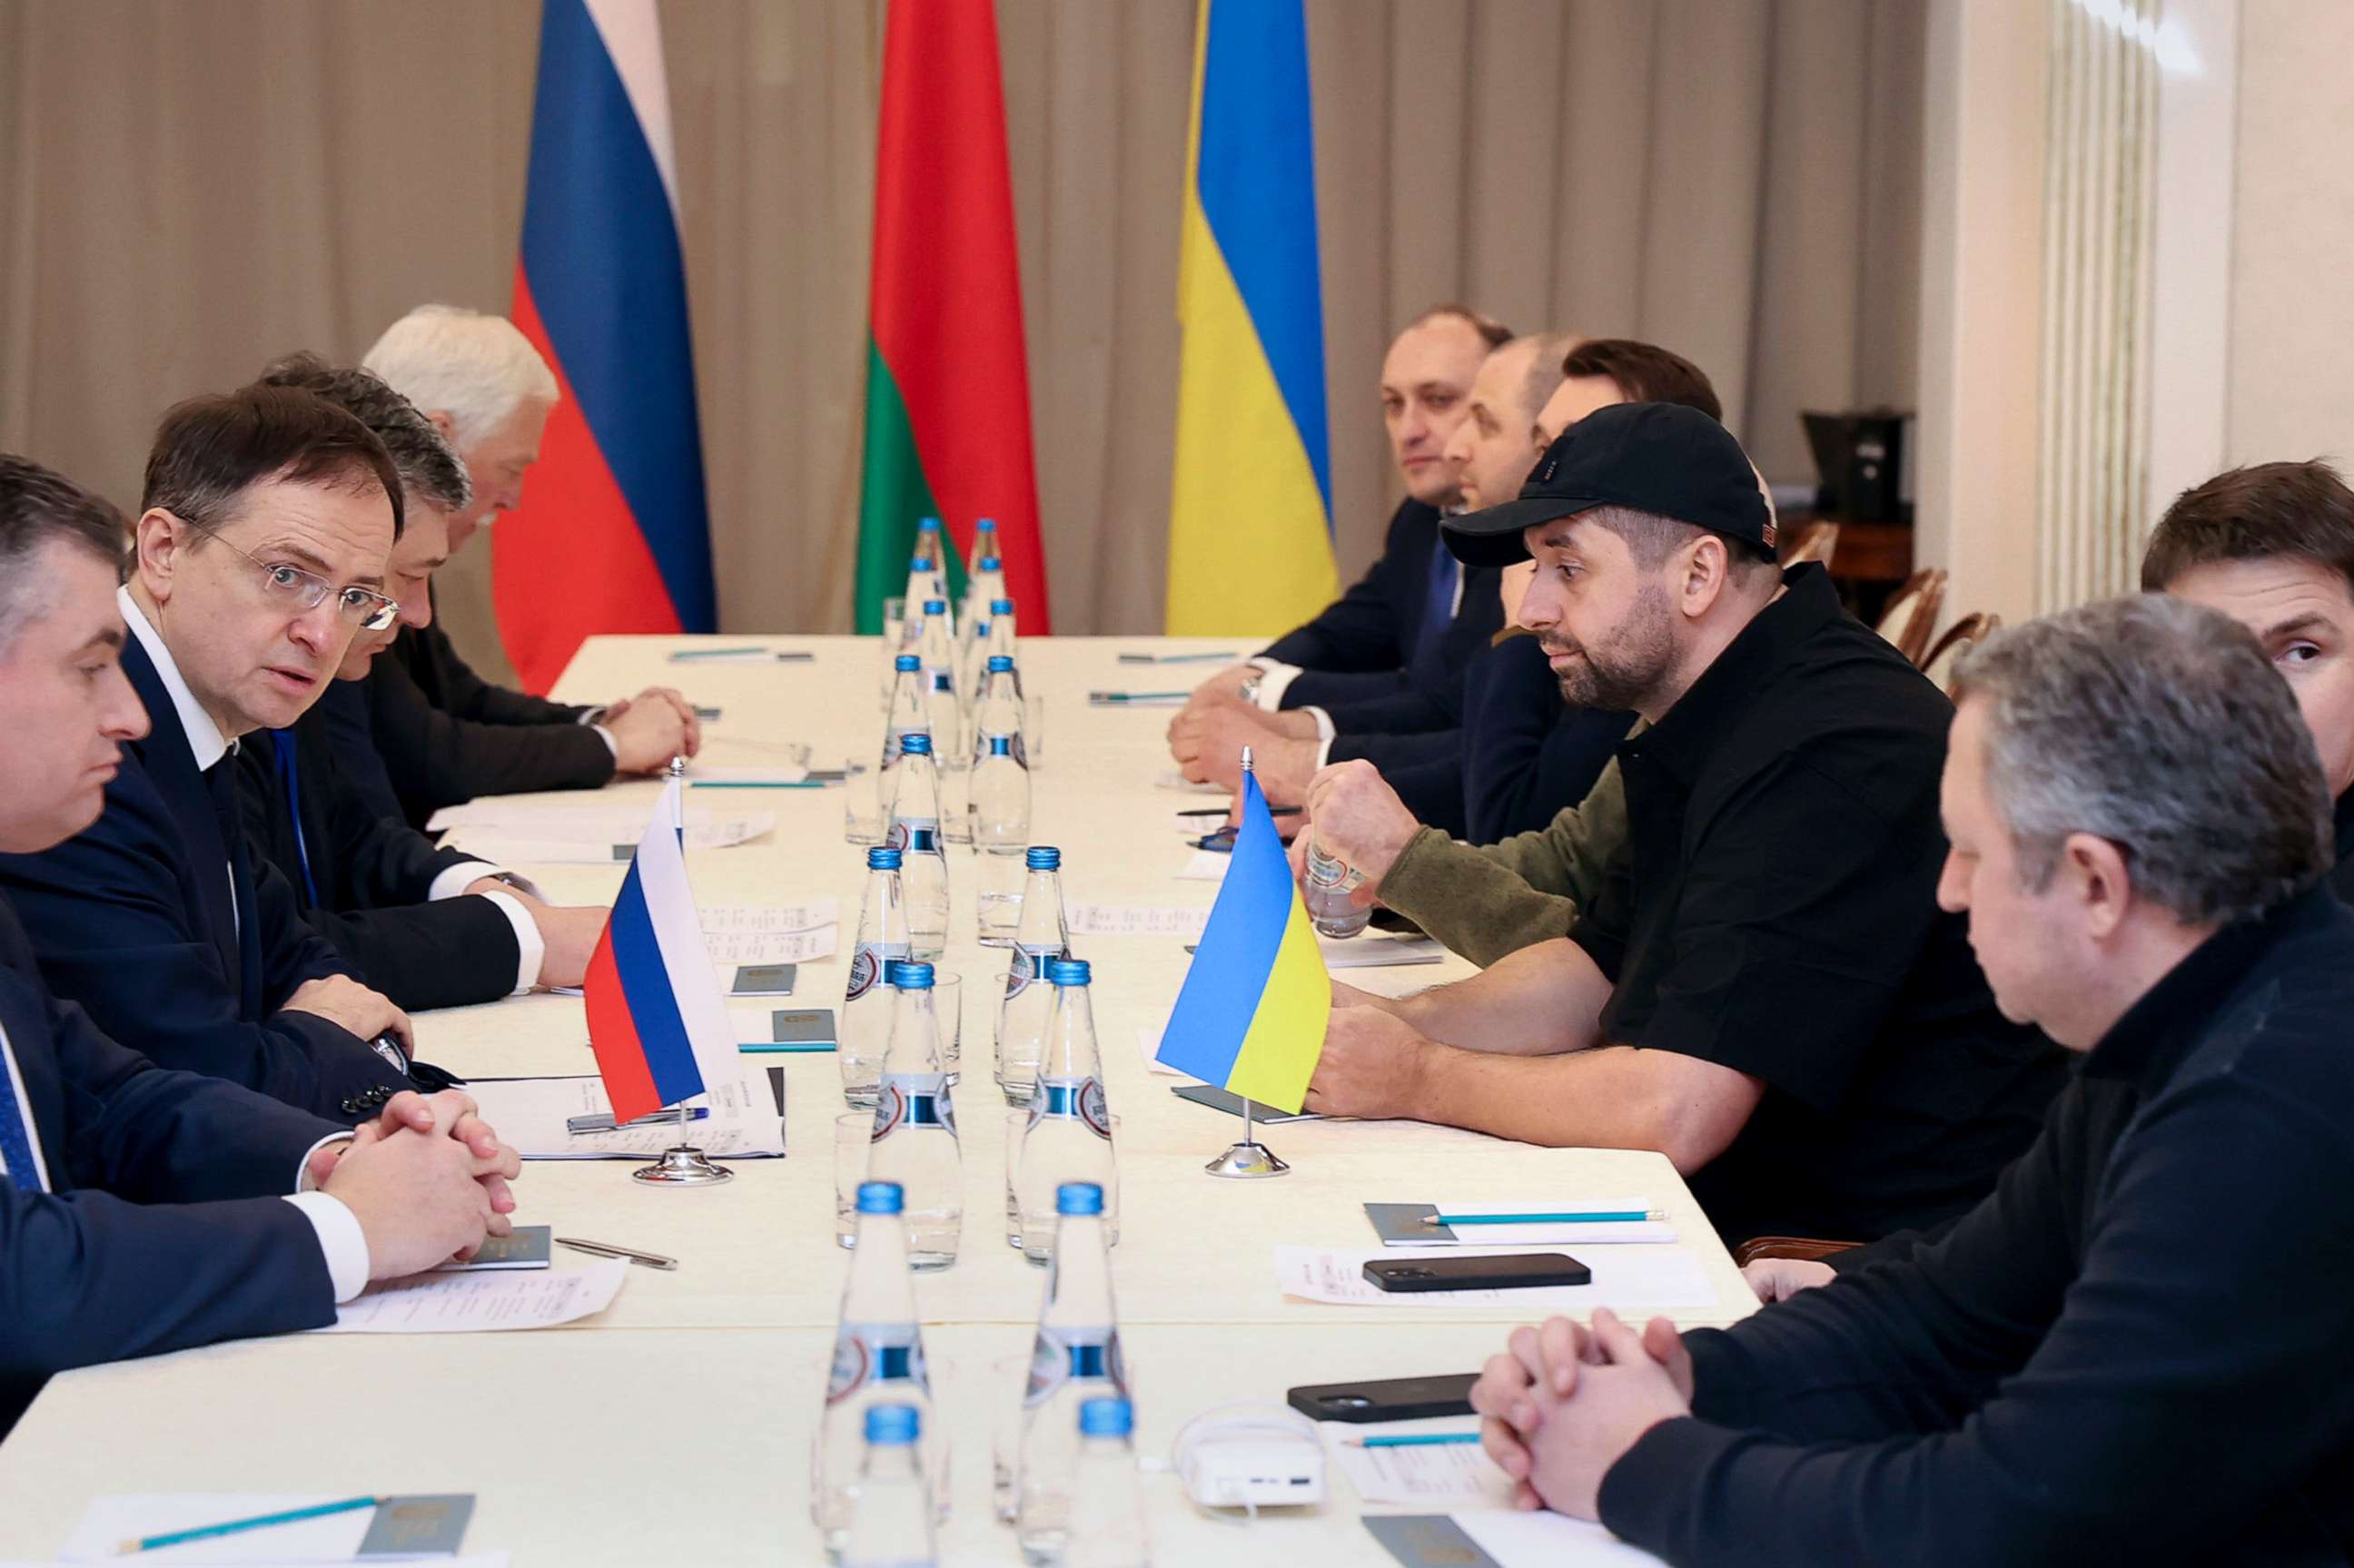 PHOTO: Vladimir Medinsky, the head of the Russian delegation, second from left, and Davyd Arakhamia, a member of the Ukrainian Parliament, third from right, attend the peace talks in Gomel region, Belarus, Feb. 28, 2022.